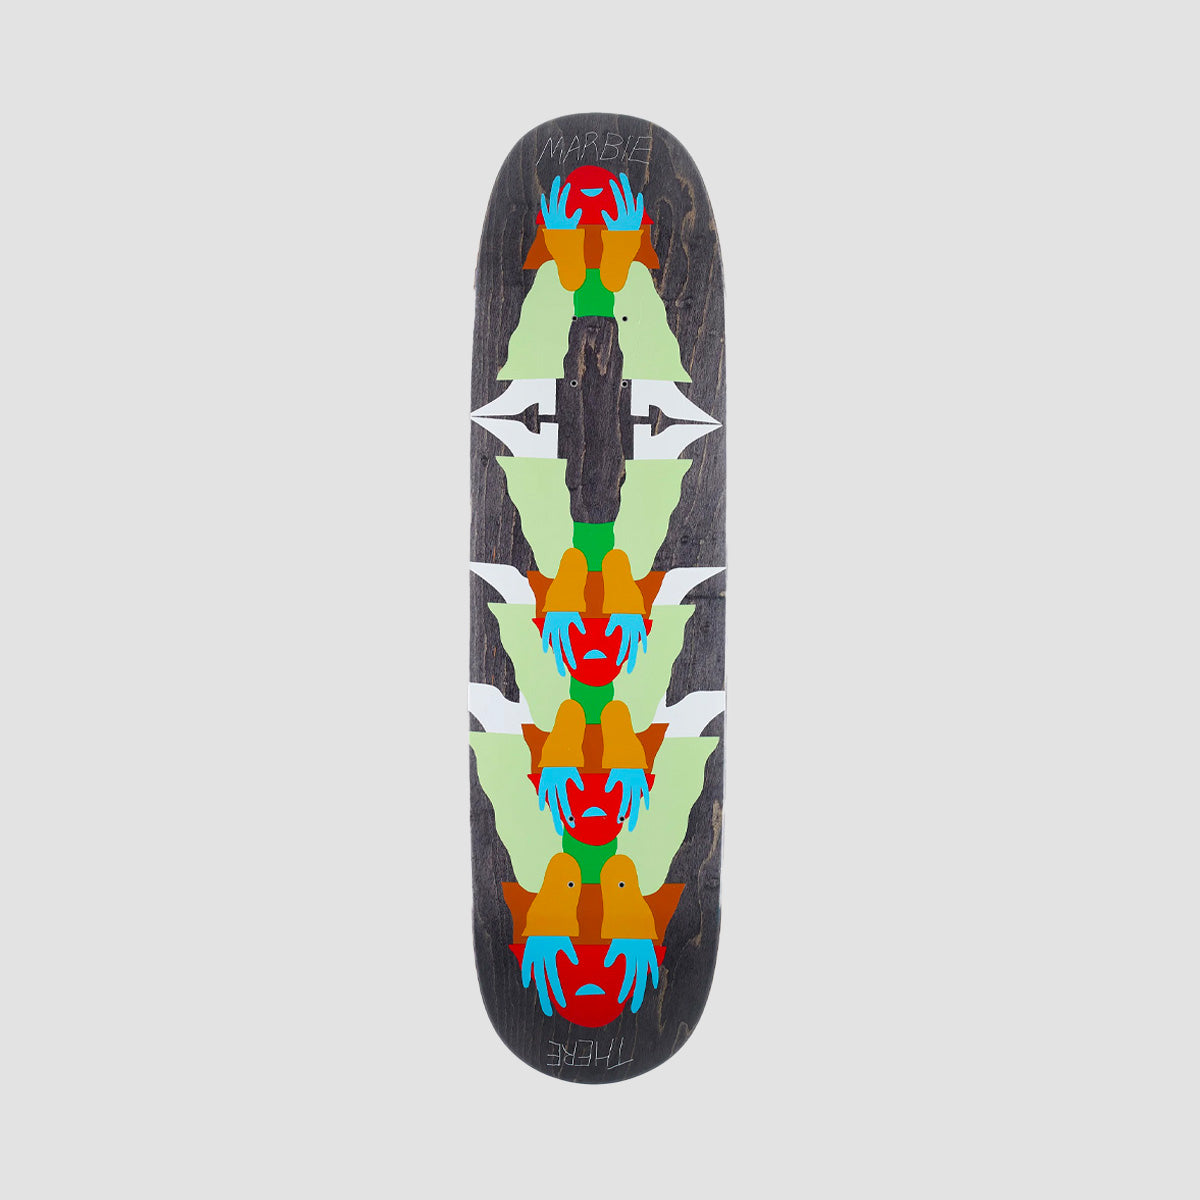 There Reflect Marbie Skateboard Deck Various Stains - 8.5"